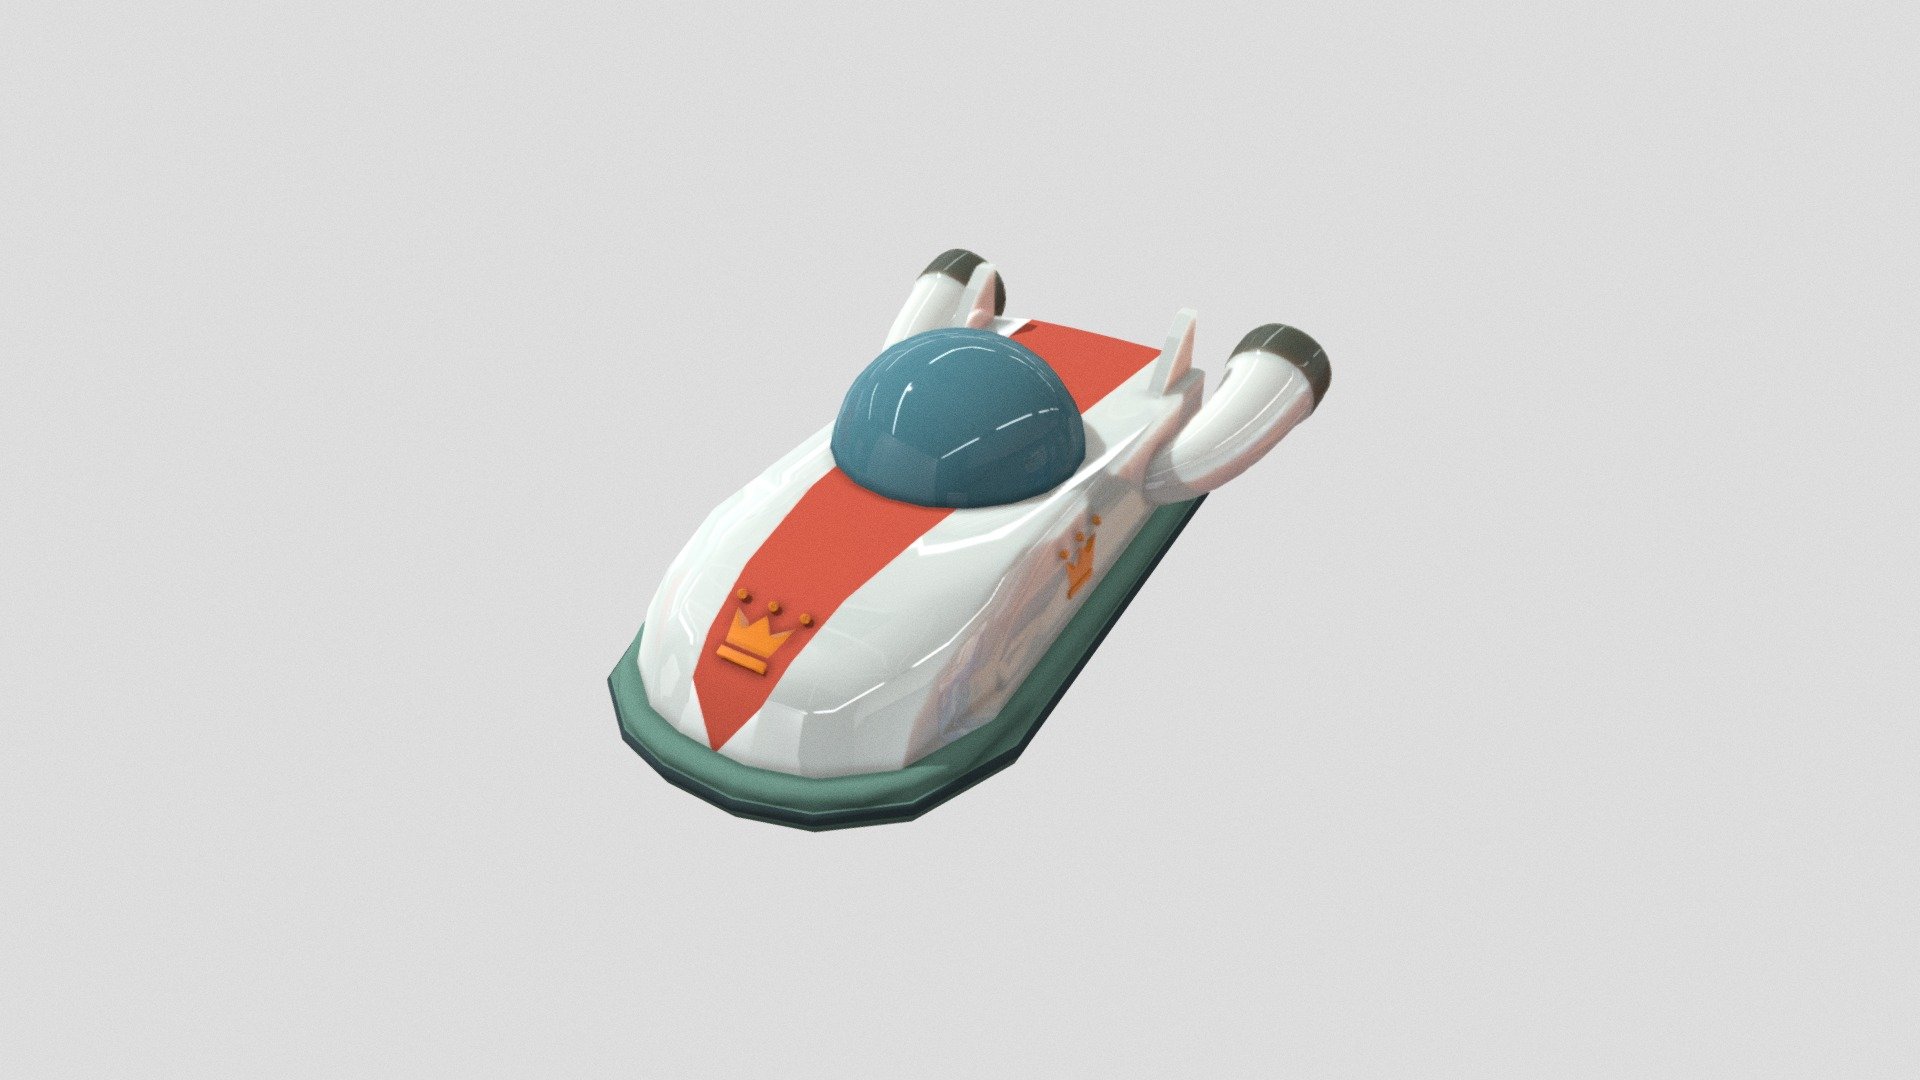 [Low Poly] Spaceship